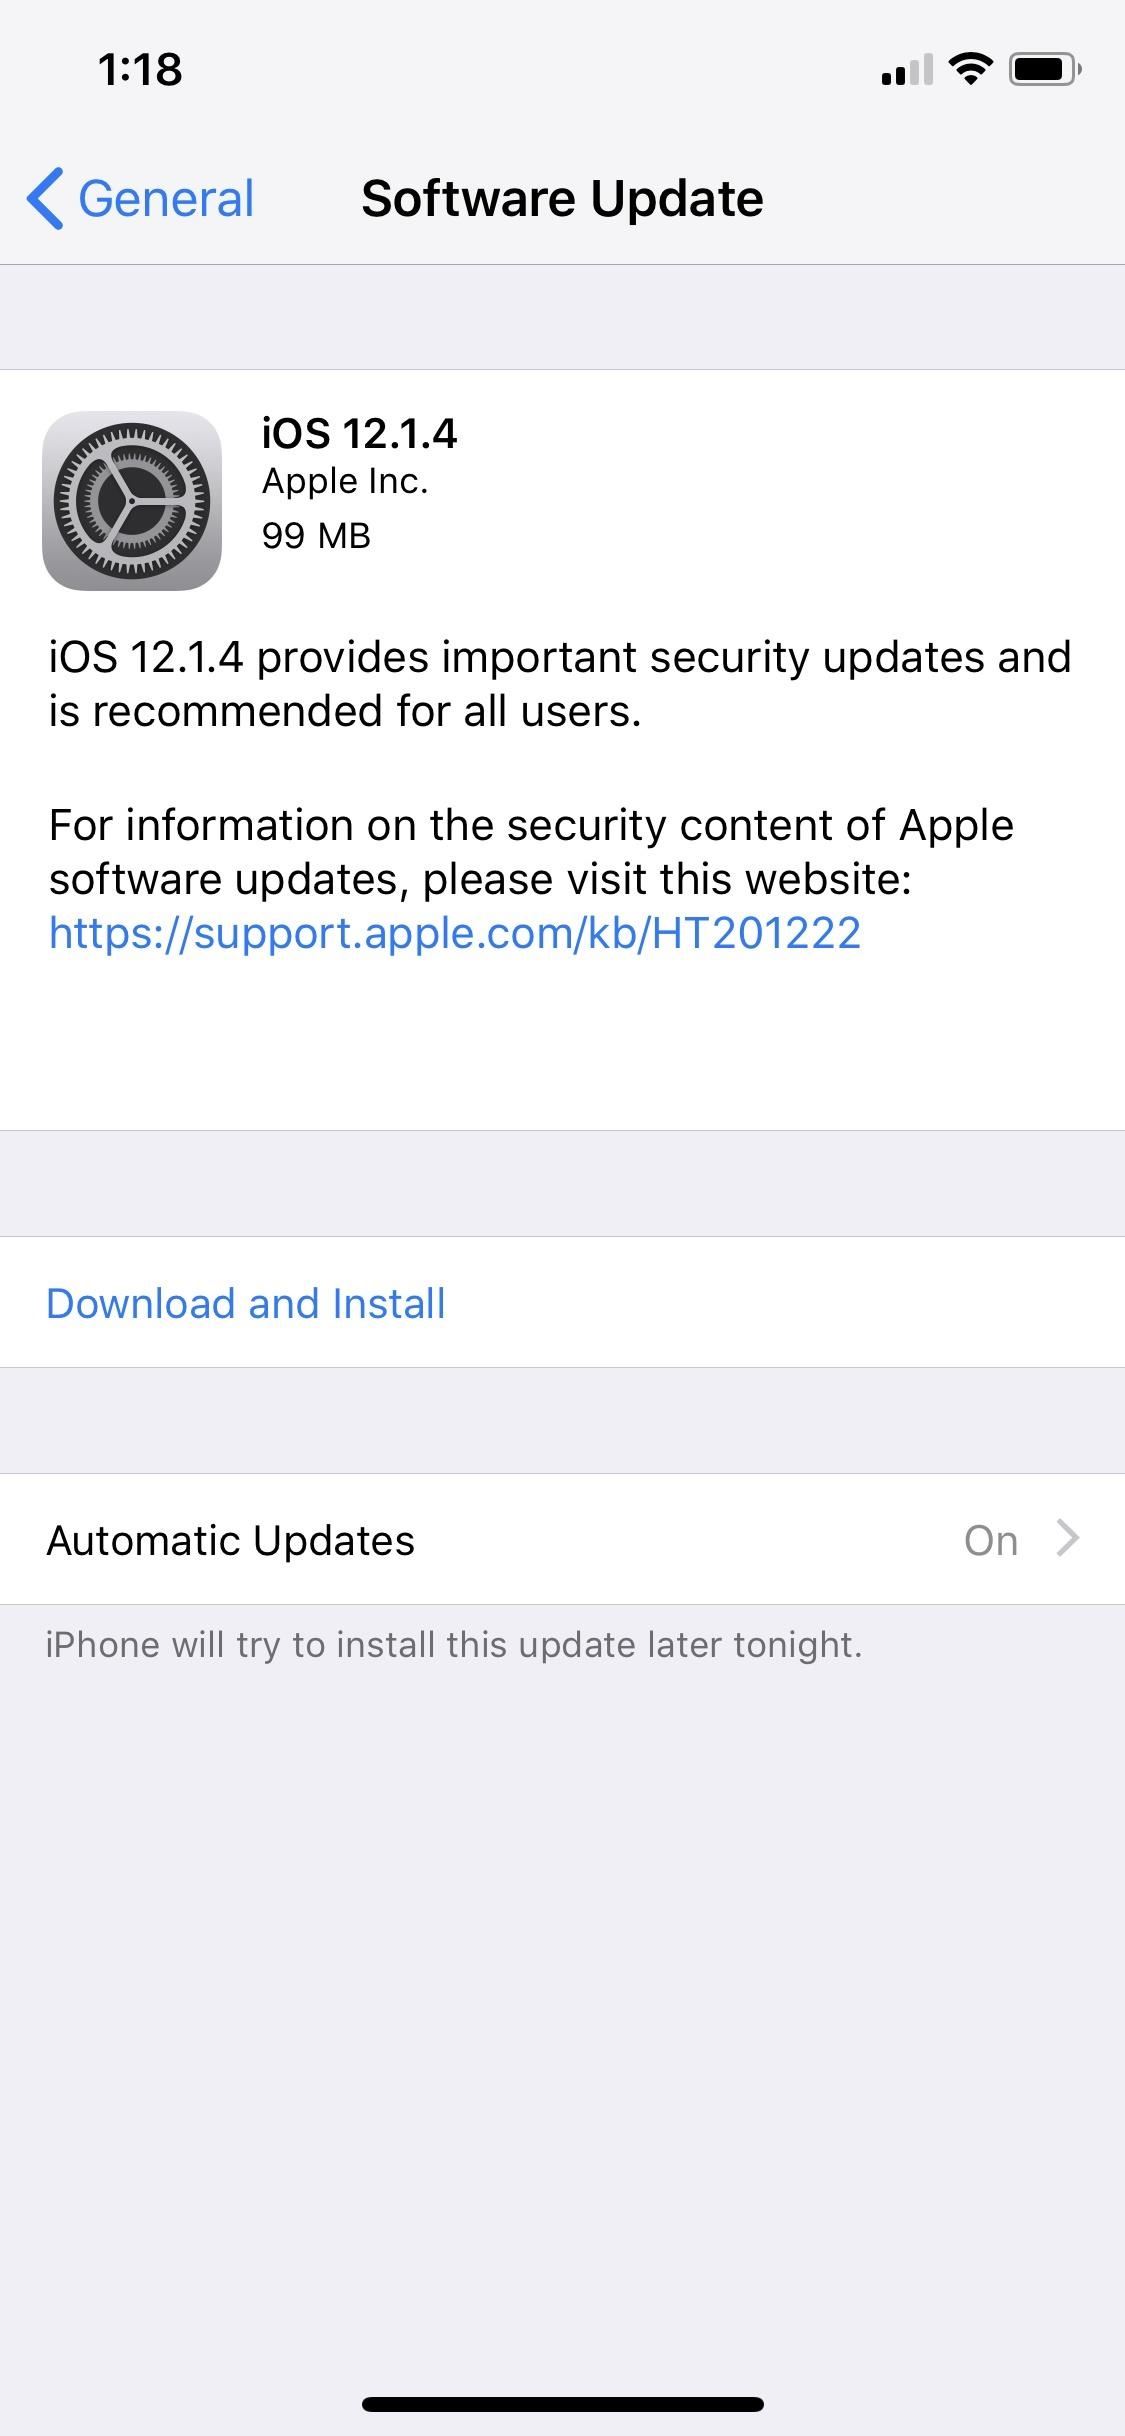 Apple Fixes Group FaceTime Security Bug with Release of iOS 12.1.4, Available Now